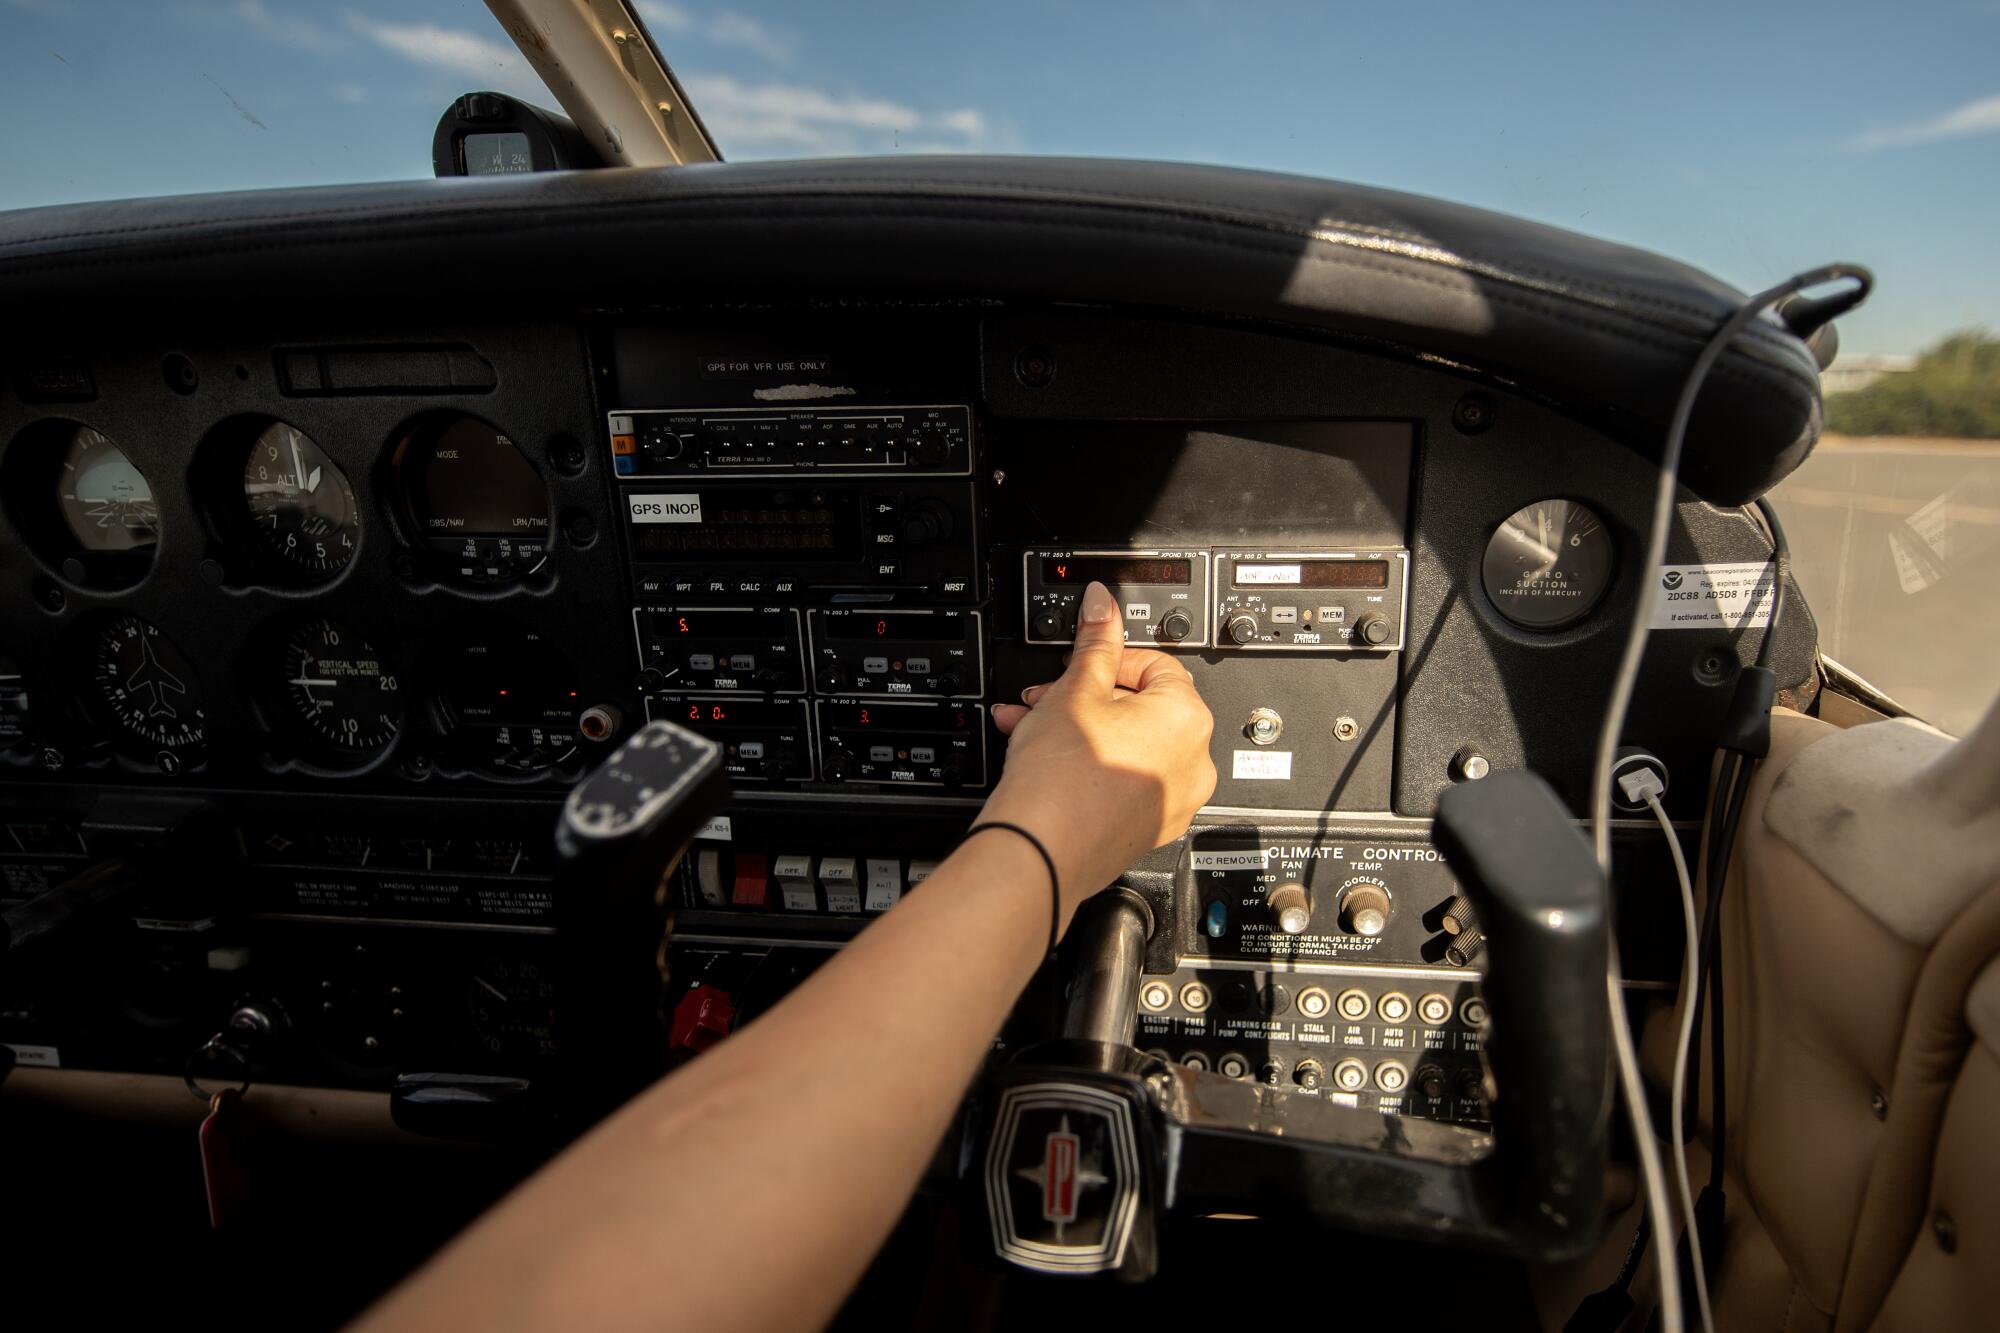 Petra Janney touches a switch on the dashboard of a small plane.